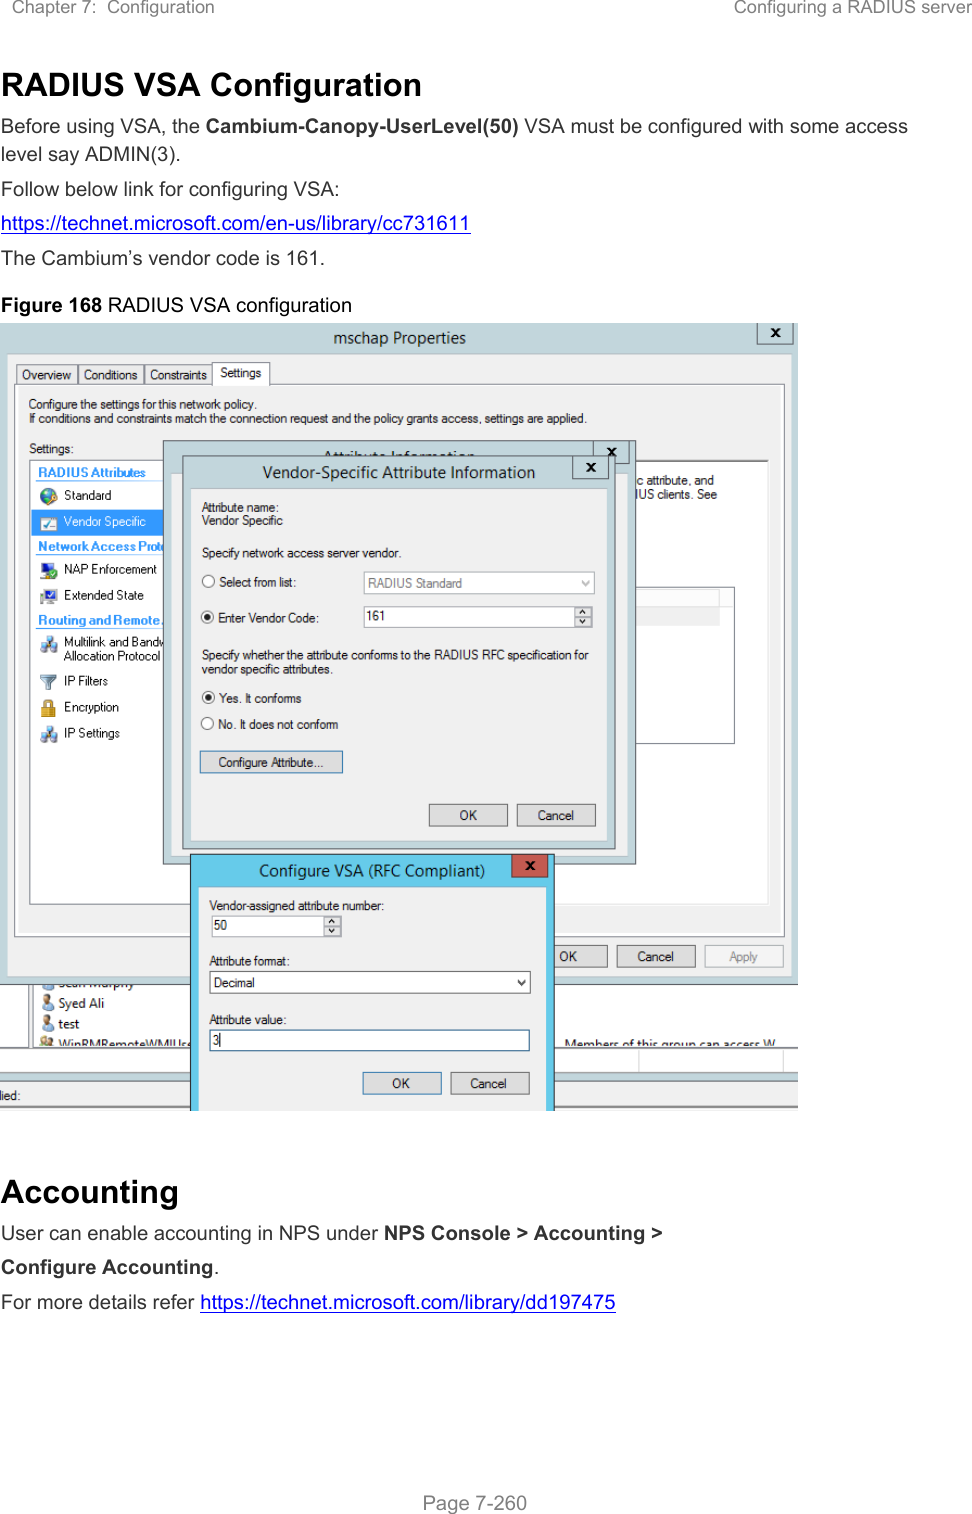 Chapter 7:  Configuration  Configuring a RADIUS server   Page 7-260 RADIUS VSA Configuration Before using VSA, the Cambium-Canopy-UserLevel(50) VSA must be configured with some access level say ADMIN(3). Follow below link for configuring VSA: https://technet.microsoft.com/en-us/library/cc731611  The Cambium’s vendor code is 161. Figure 168 RADIUS VSA configuration   Accounting User can enable accounting in NPS under NPS Console &gt; Accounting &gt;  Configure Accounting. For more details refer https://technet.microsoft.com/library/dd197475   